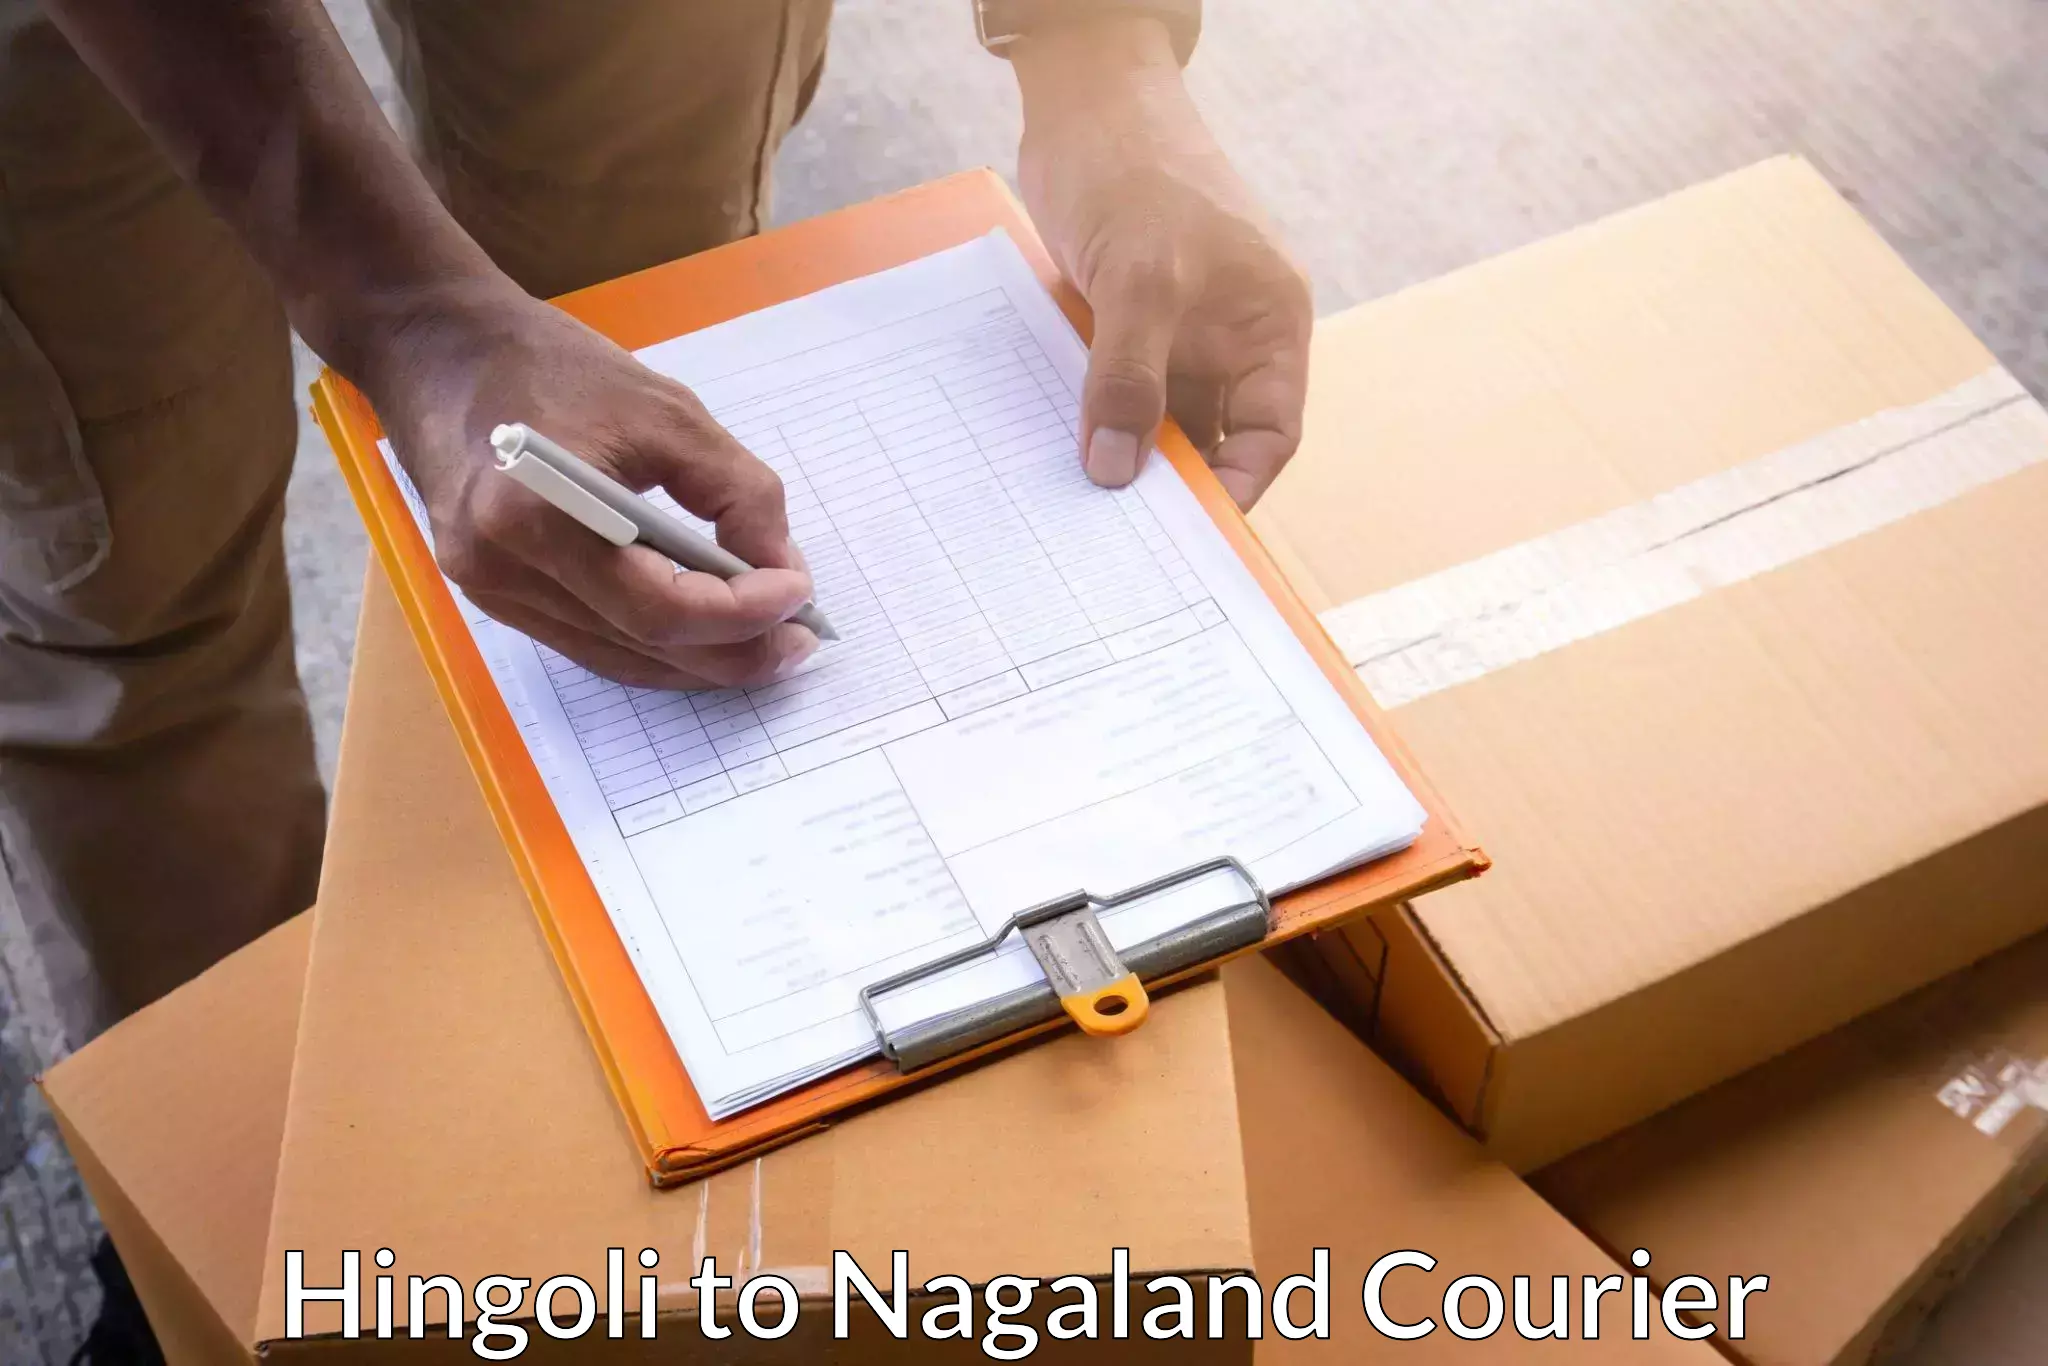 Affordable parcel service Hingoli to Mon